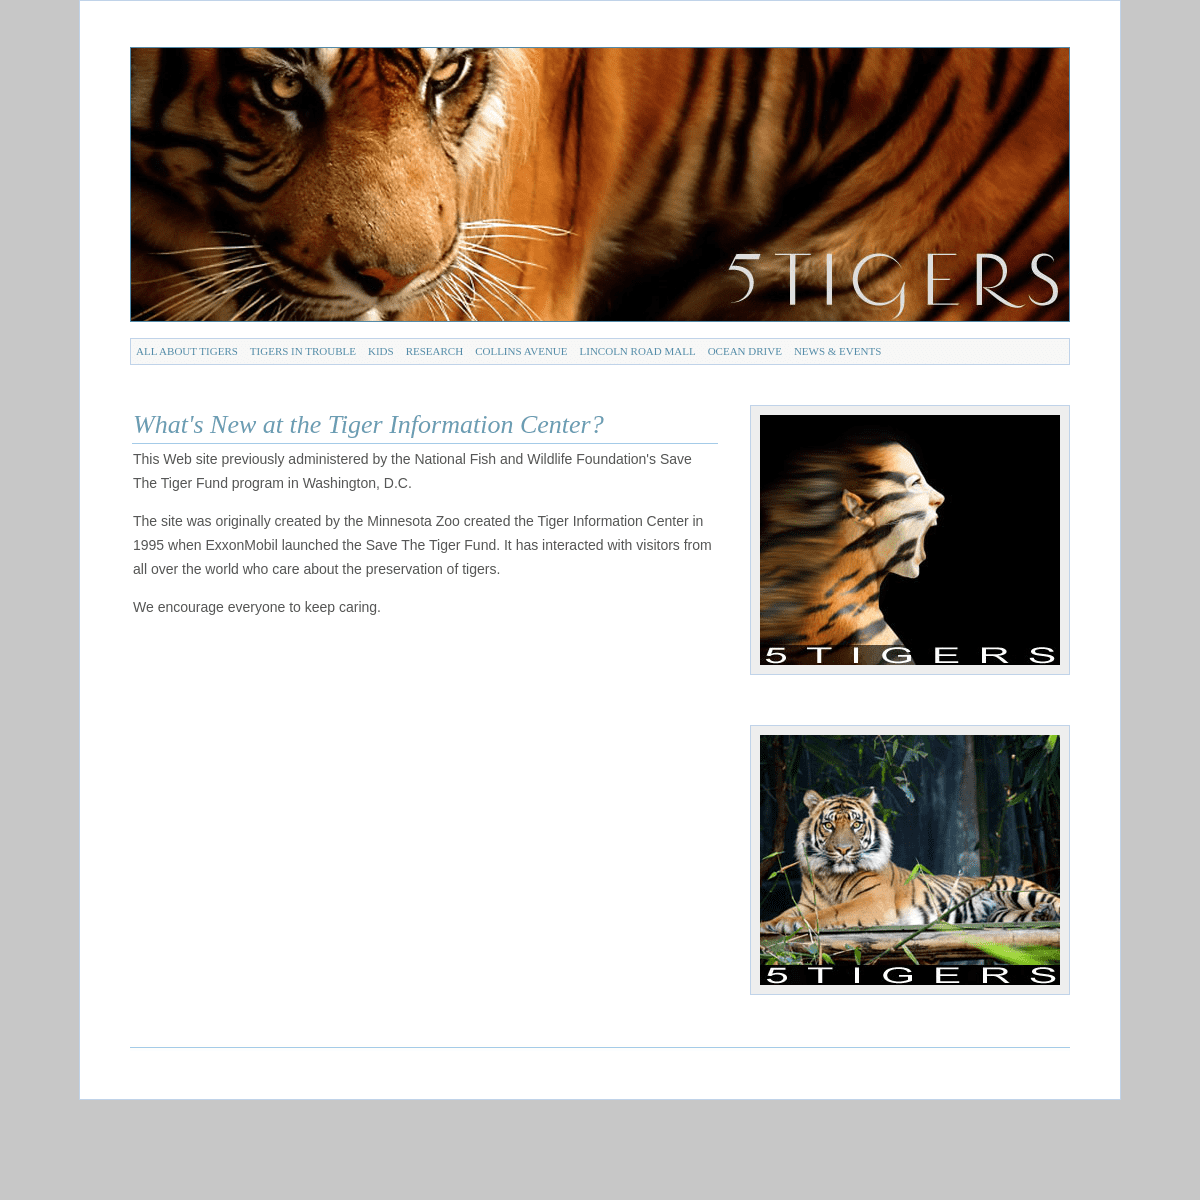 A complete backup of https://5tigers.org